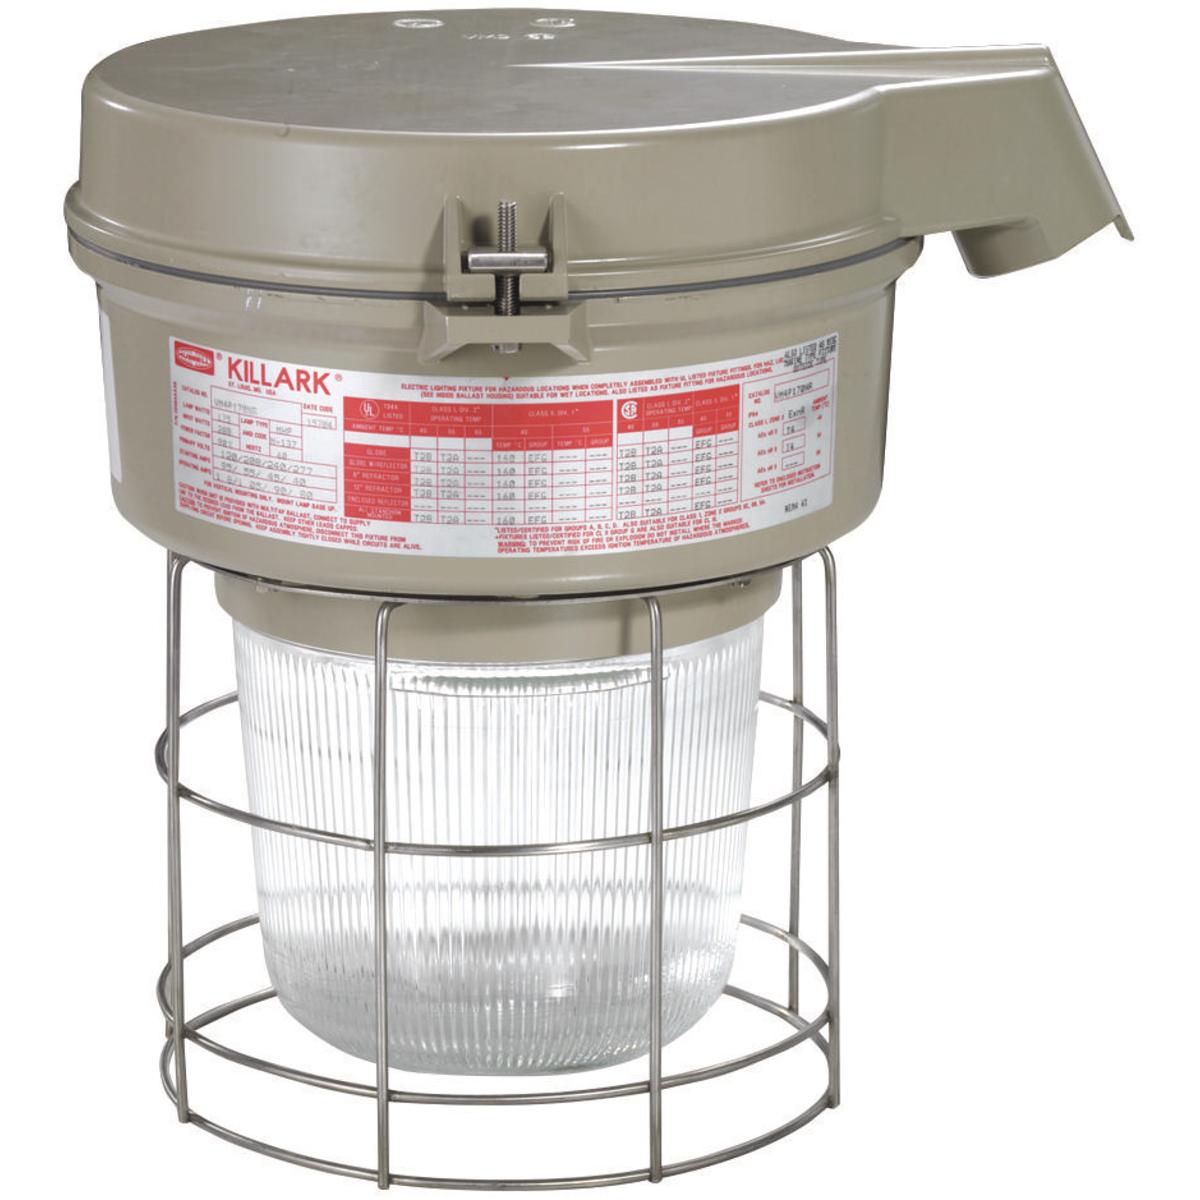 Hubbell VM4H105D5GLG VM4 Series - 100W Metal Halide 480V - 1-1/2" Stanchion 25° - Globe and Guard  ; Ballast tank and splice box – corrosion resistant copper-free aluminum alloy with baked powder epoxy/polyester finish, electrostatically applied for complete, uniform corrosio